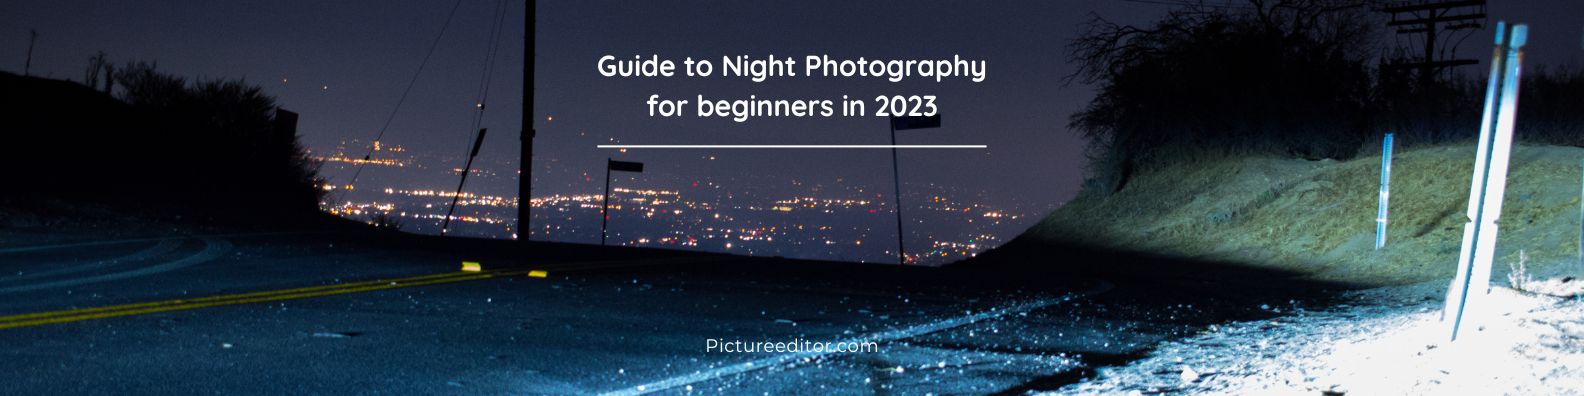 Guide to Night Photography for beginners in 2023